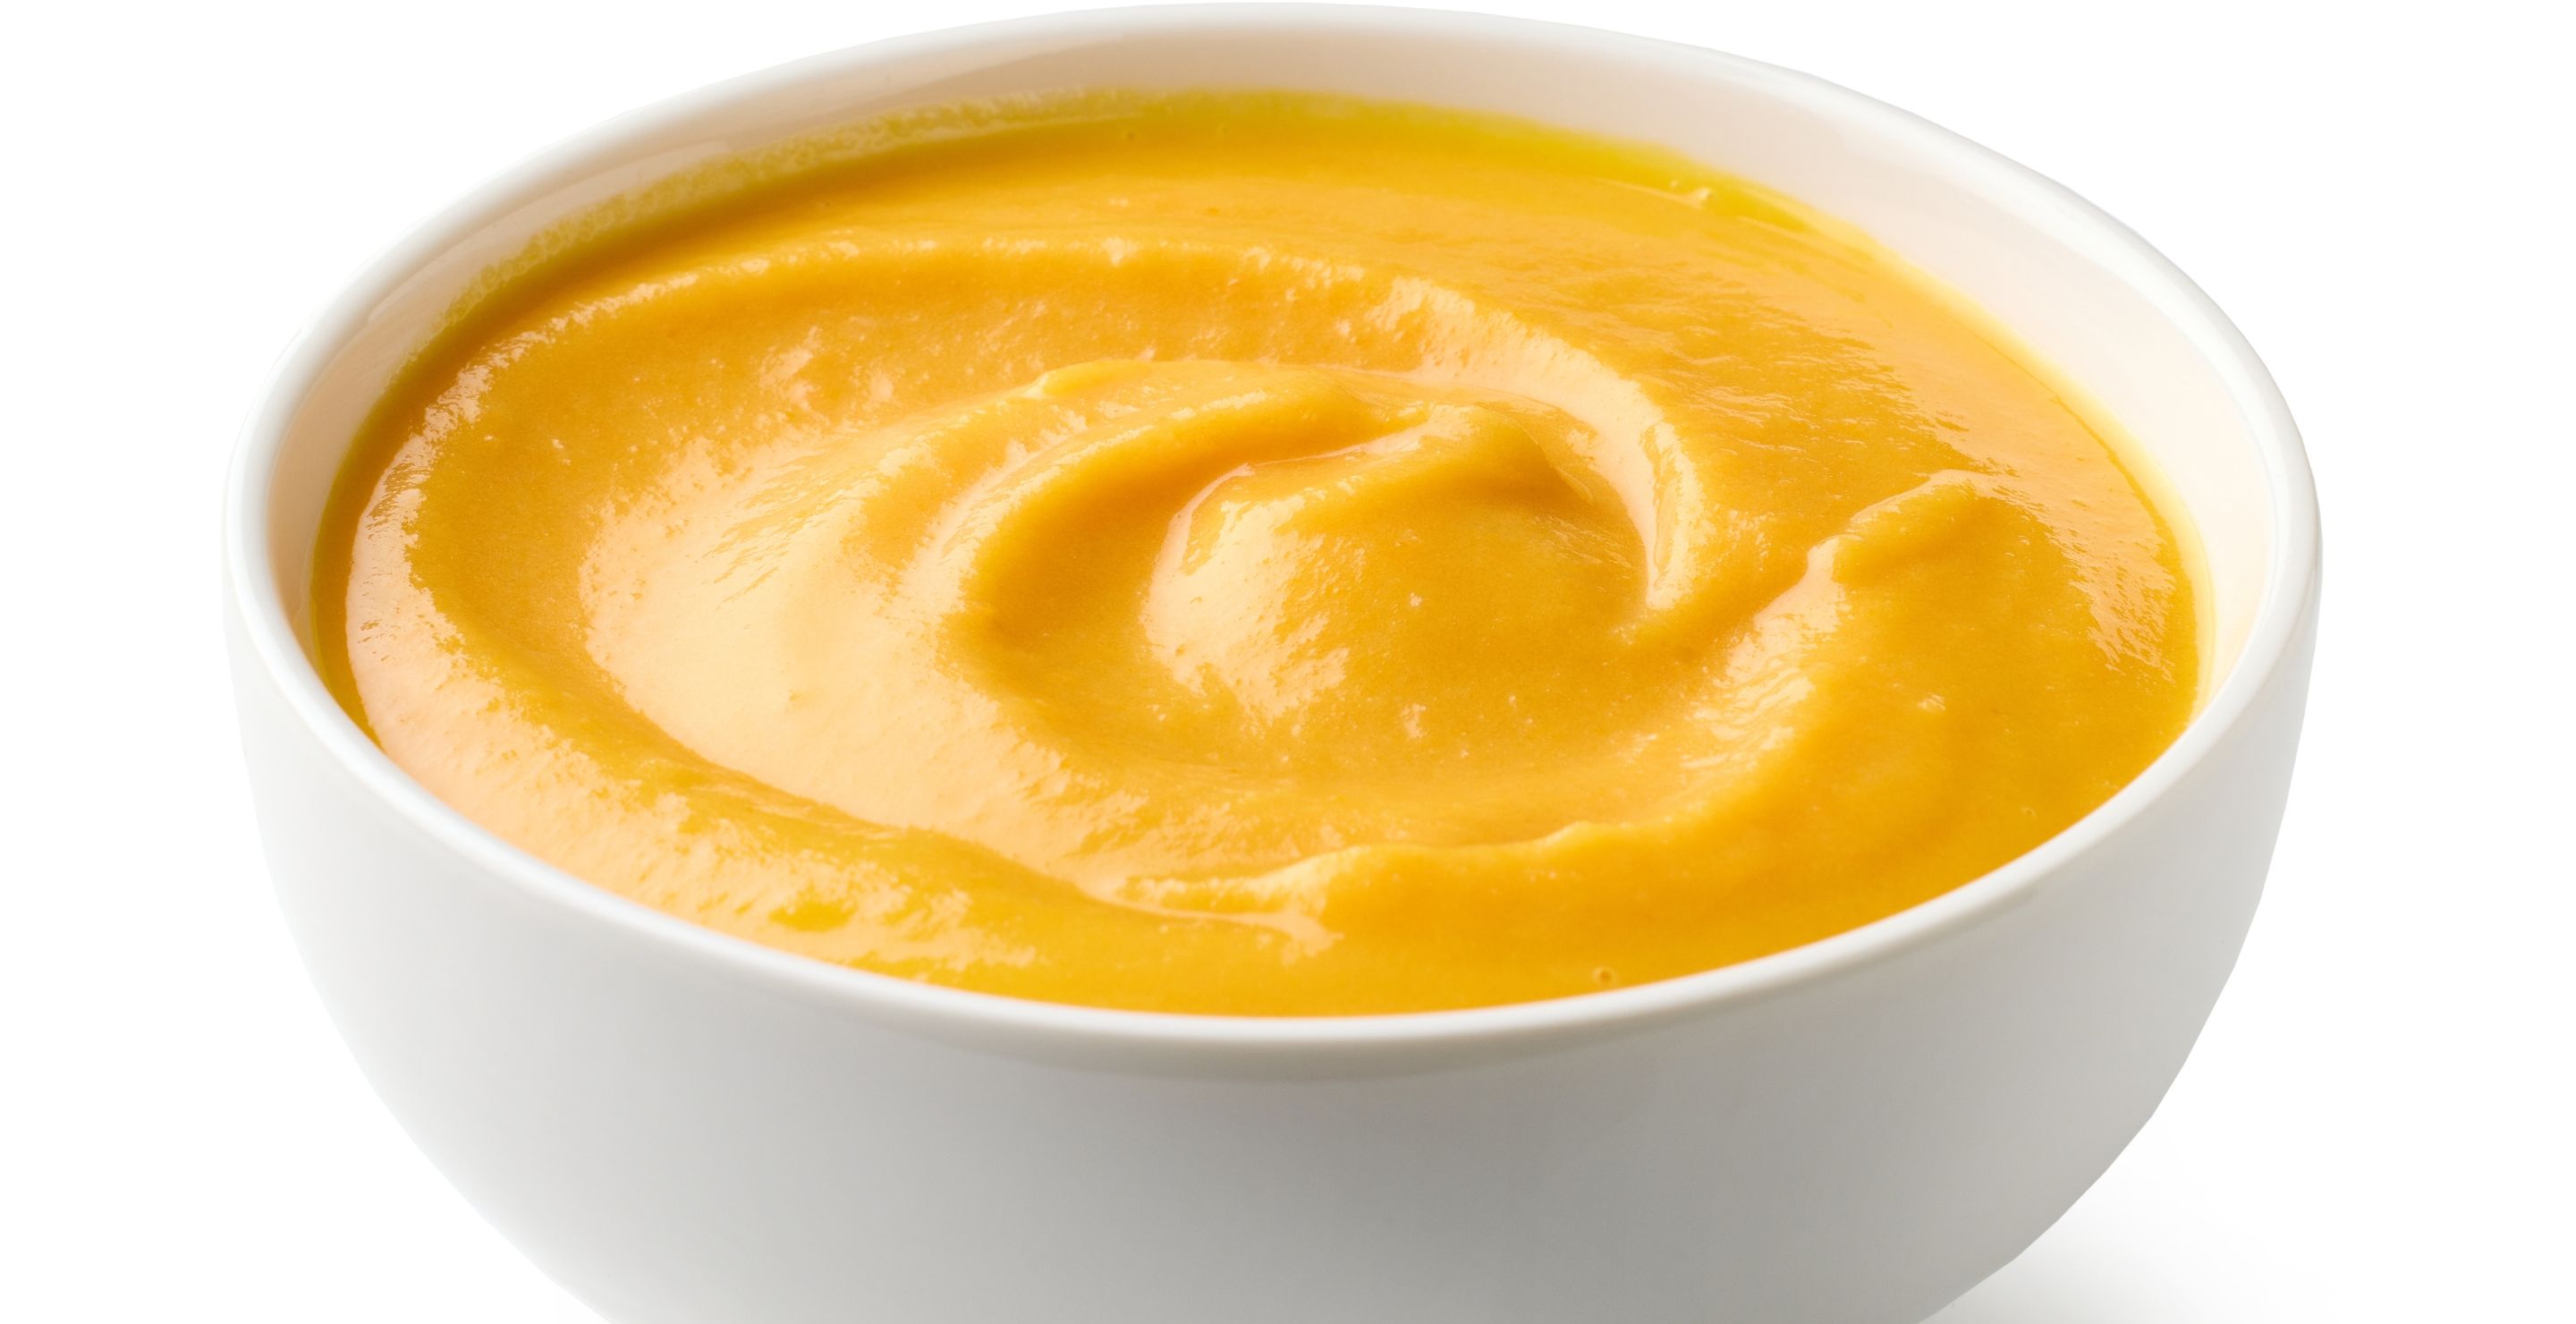 Baby Food Recalled Due To Possible Bacteria Contamination